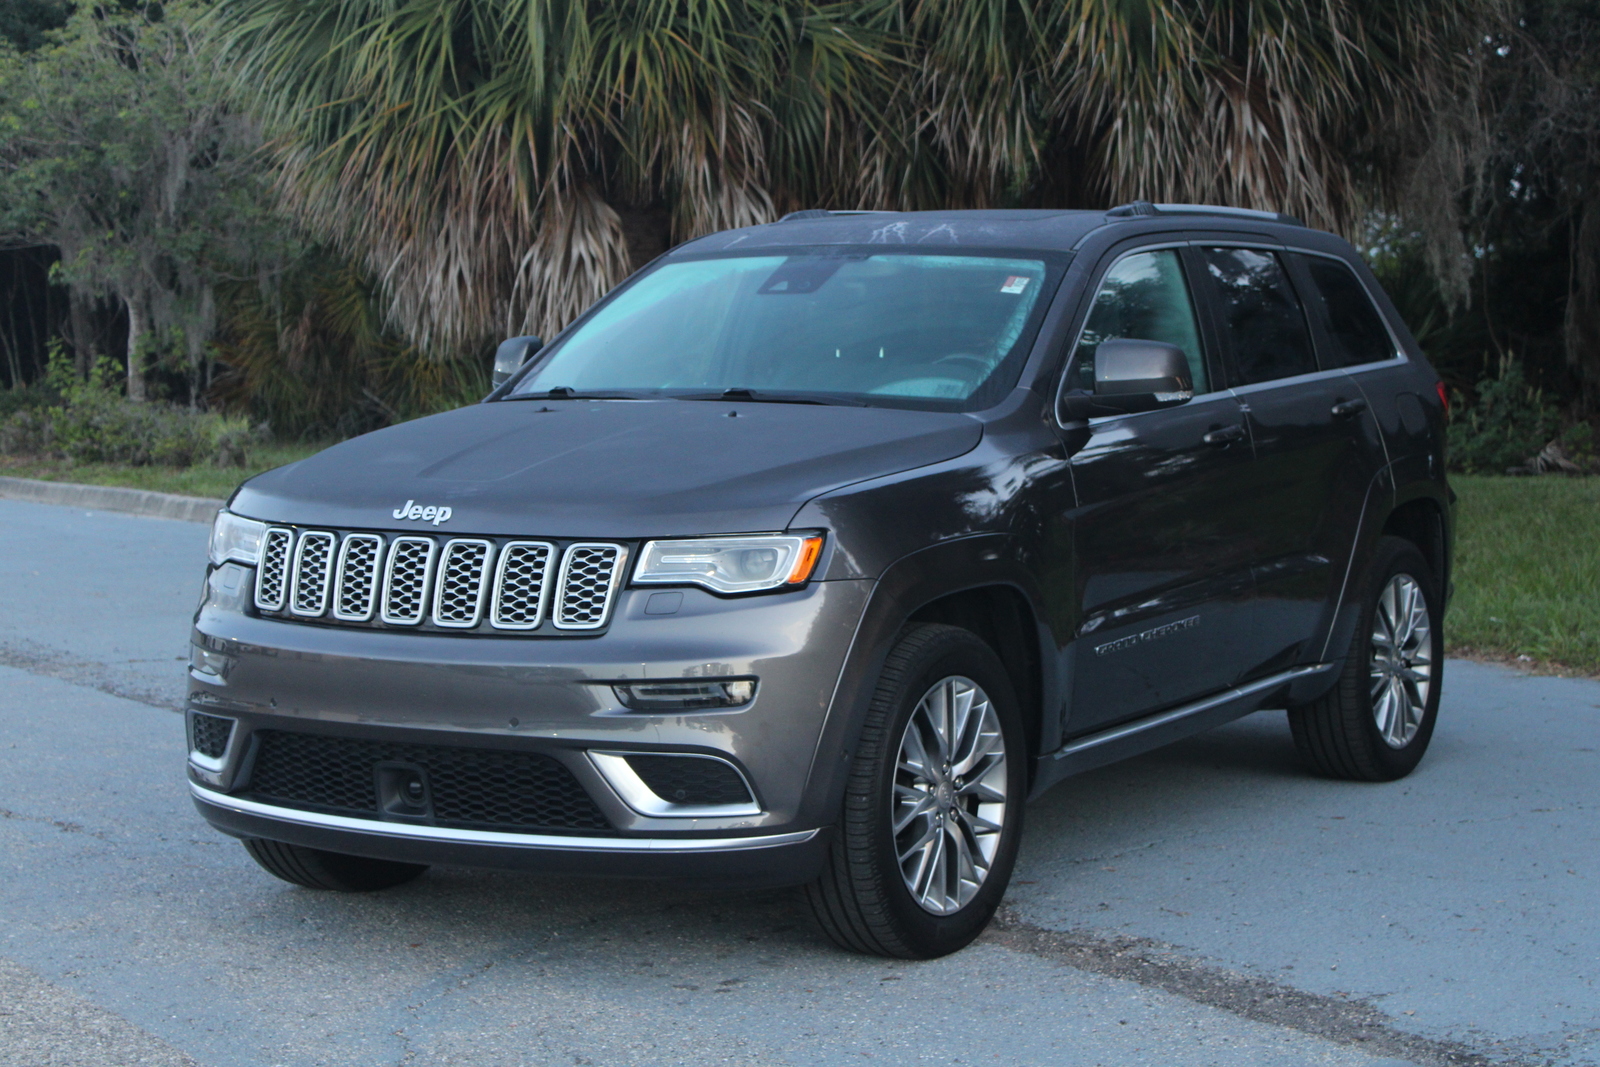 PreOwned 2018 Jeep Grand Cherokee Summit Sport Utility in